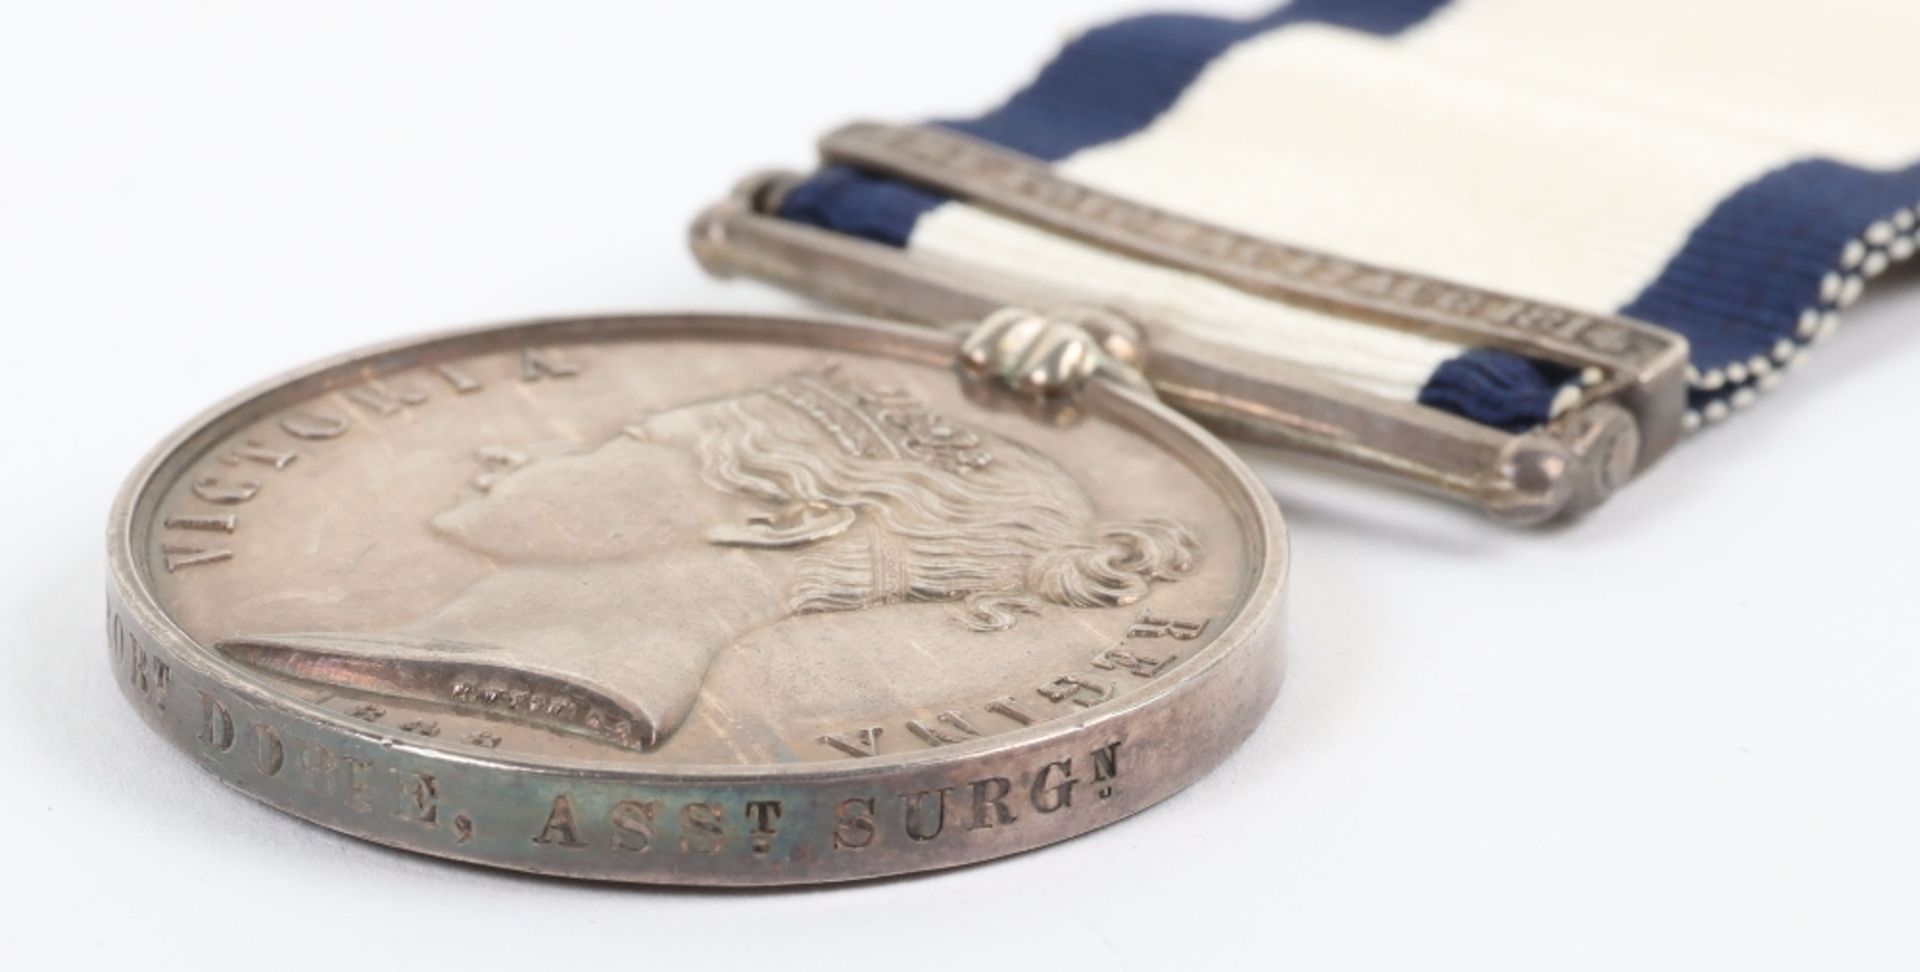 Naval General Service Medal 1793-1840 Awarded to Assistant Surgeon Robert Dobie for the Action on th - Image 2 of 3